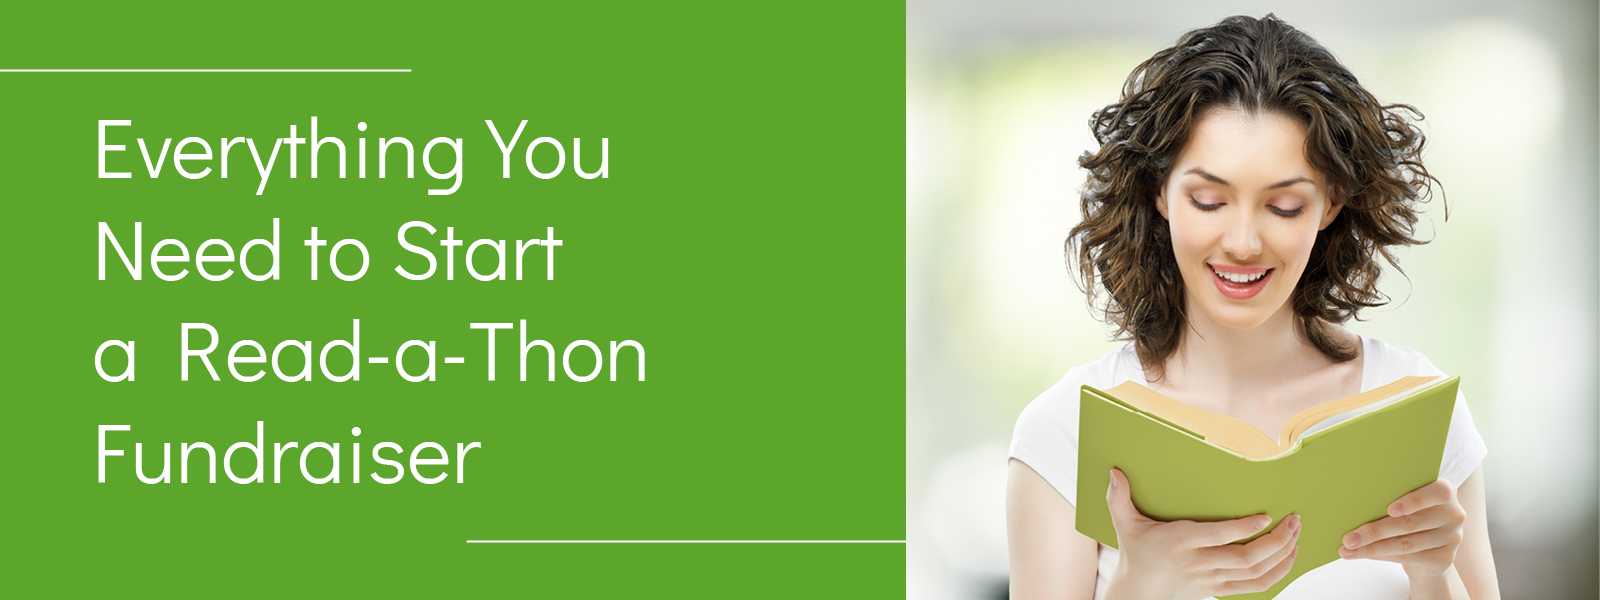 Explore how to start your own read-a-thon fundraising campaign with the steps in this guide.